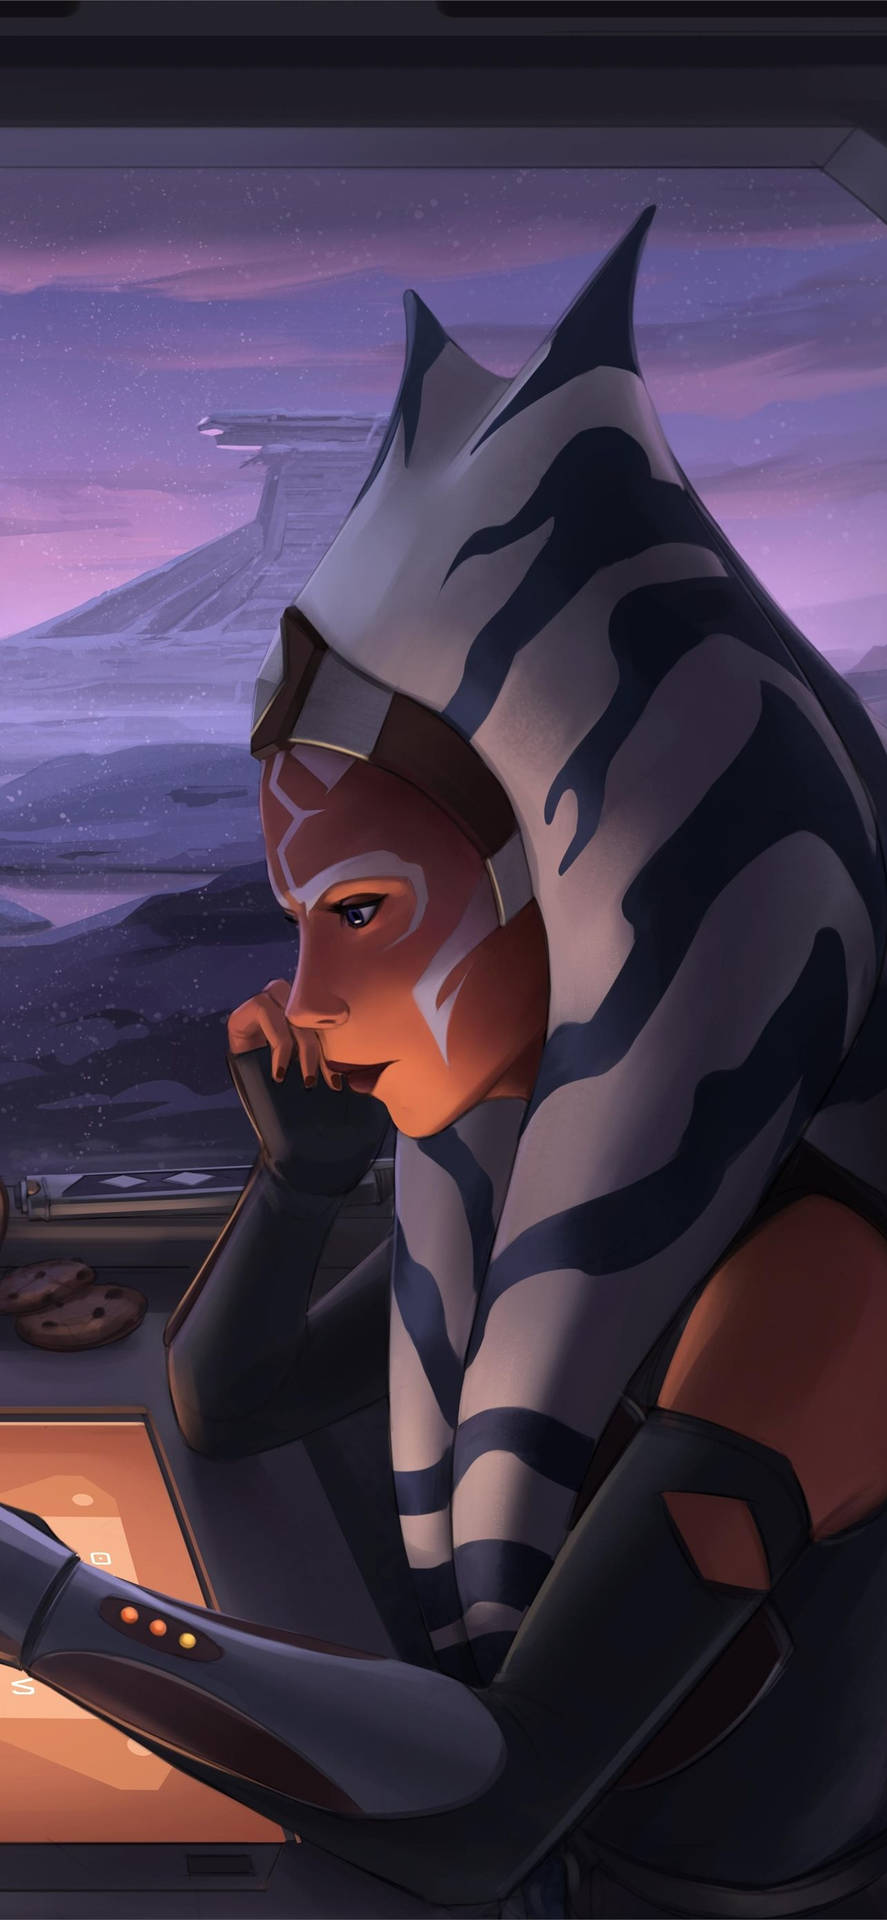 Ahsoka Tano stands with a lightsaber in hand ready for battle Wallpaper